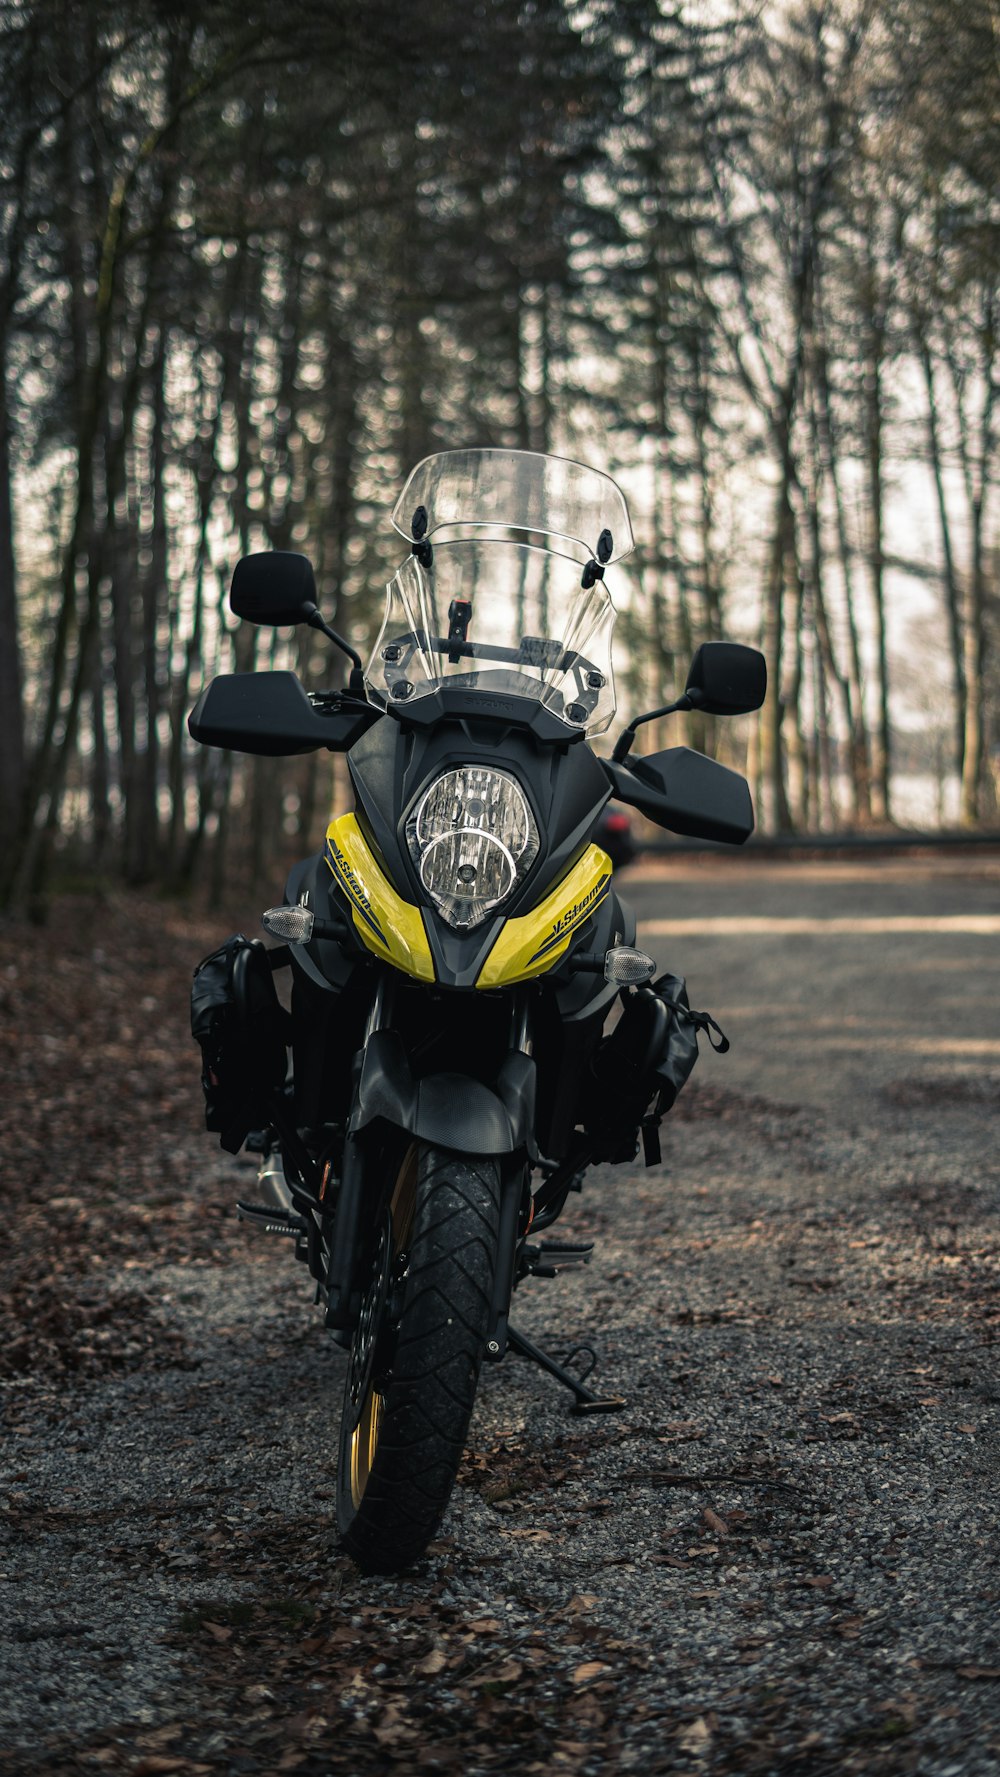 a yellow and black motorcycle parked on a dirt road